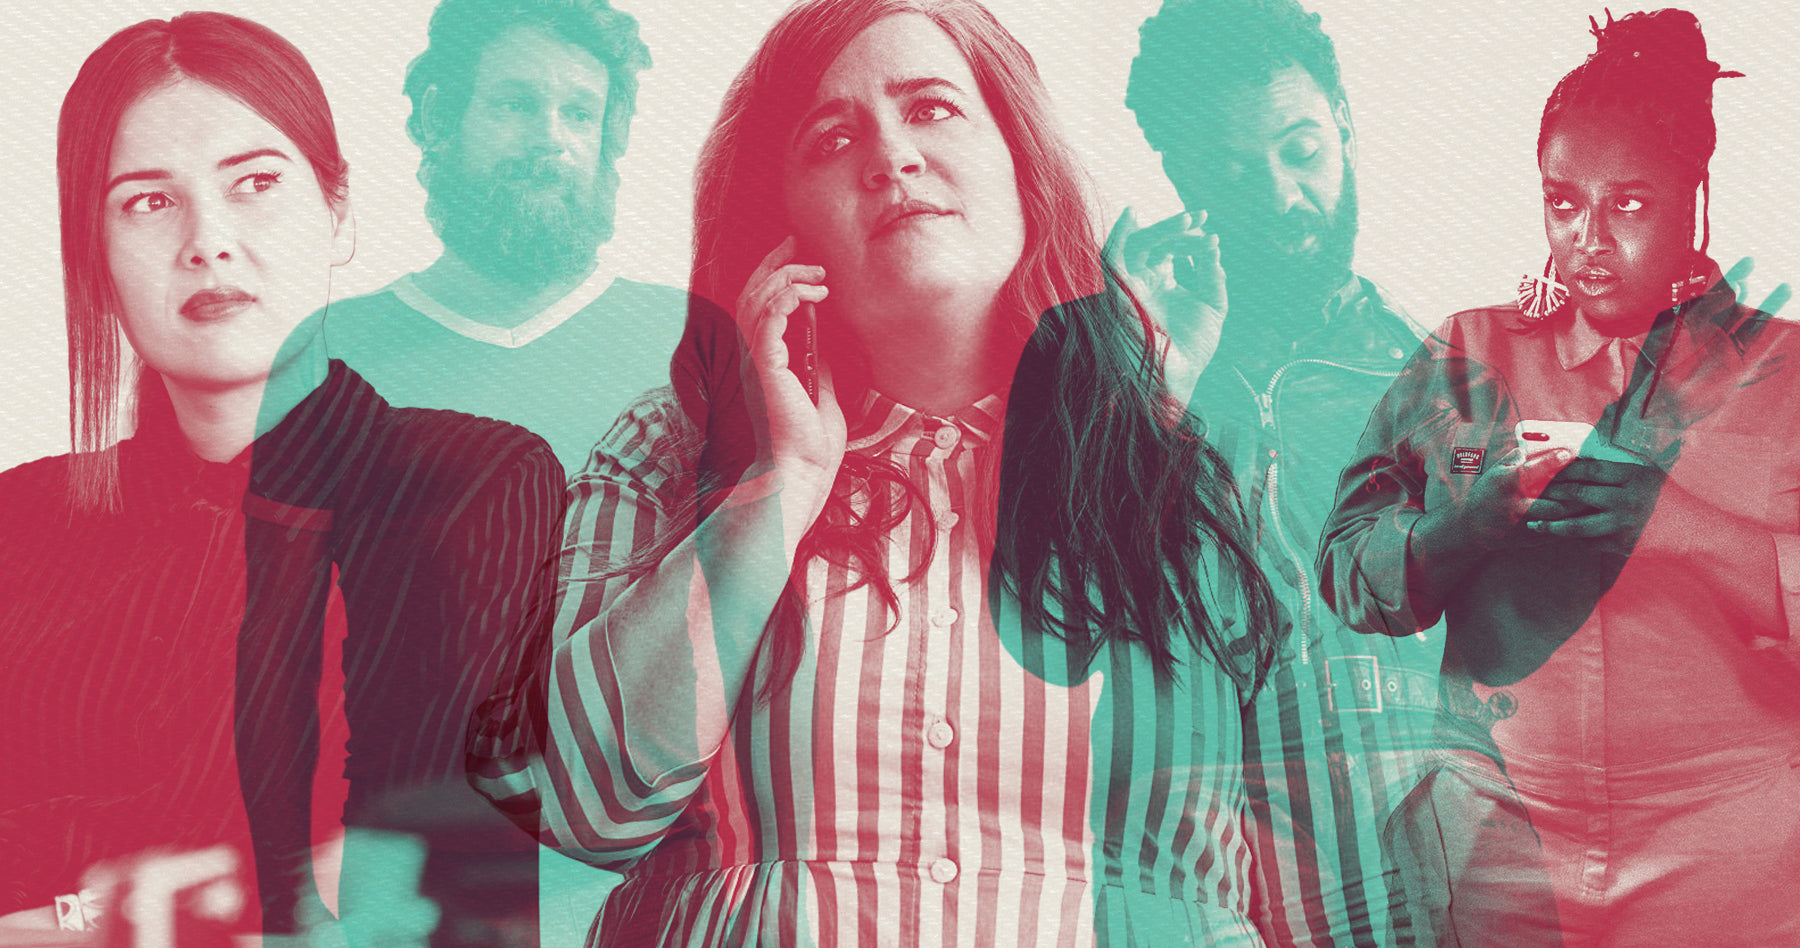 Photo collage of the cast of Shrill. From left to right Ruthie (Patti Harrison), Ryan (Luka Jones), Annie Easton (Aidy Bryant), Amadi (Ian Owens), and Fran (Lolly Adefope).